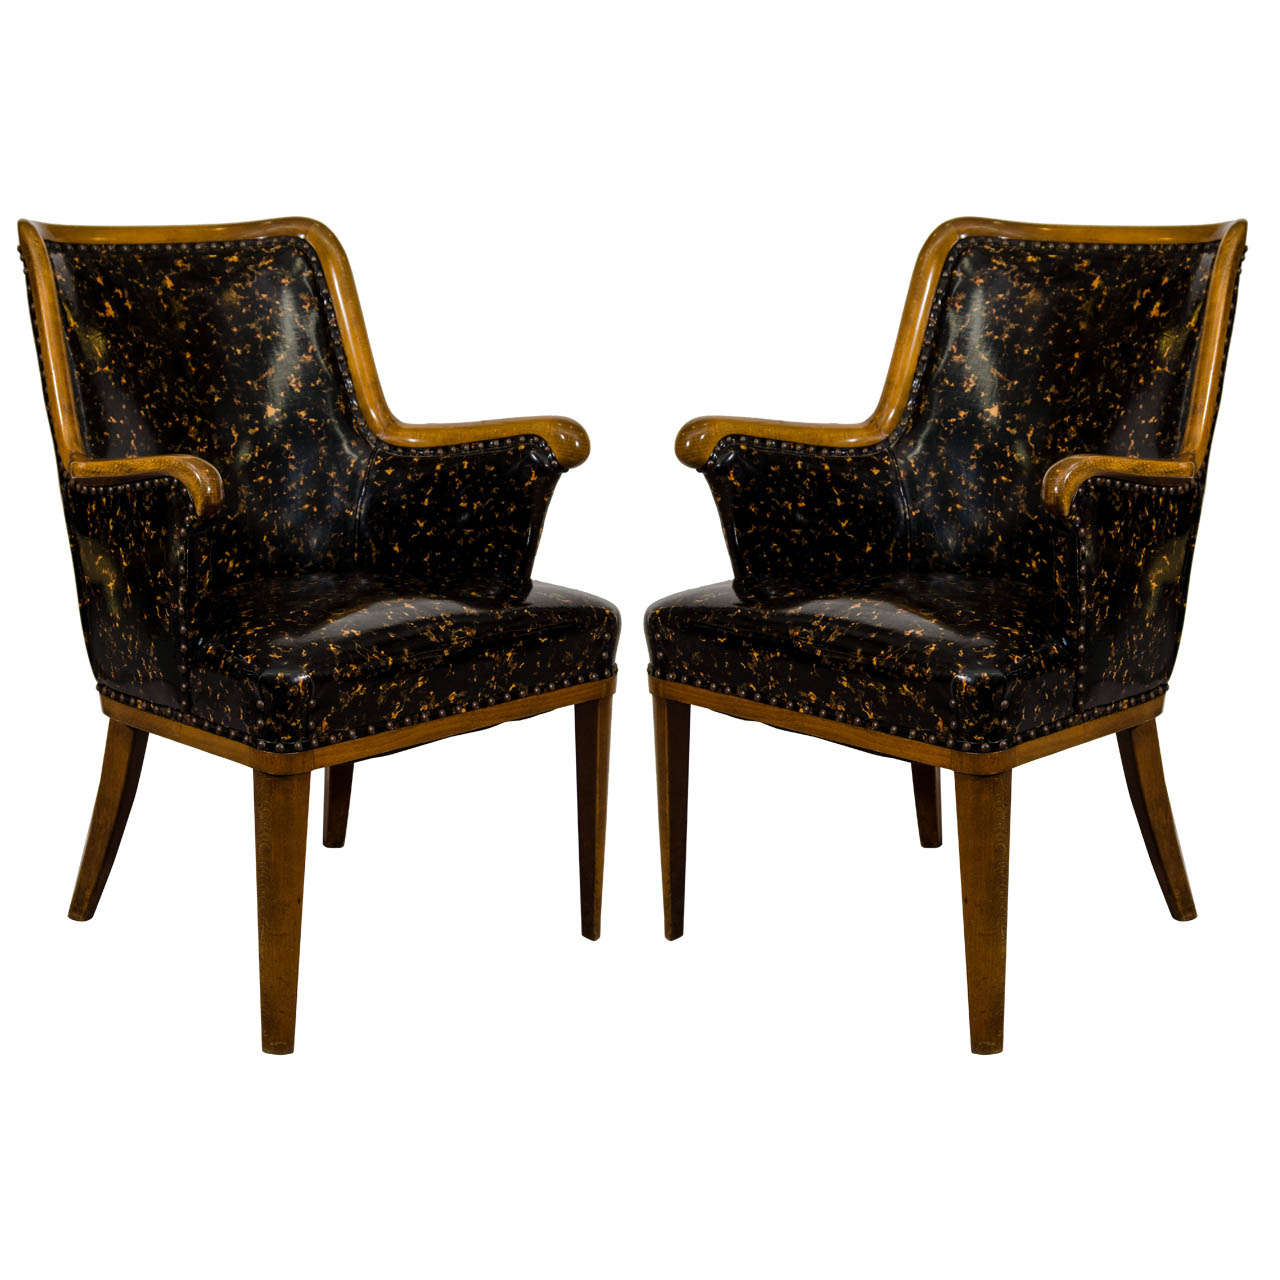  Great Hollywood Regency Pair of Armchairs in a Patent Tortoise Shell Upholstery For Sale